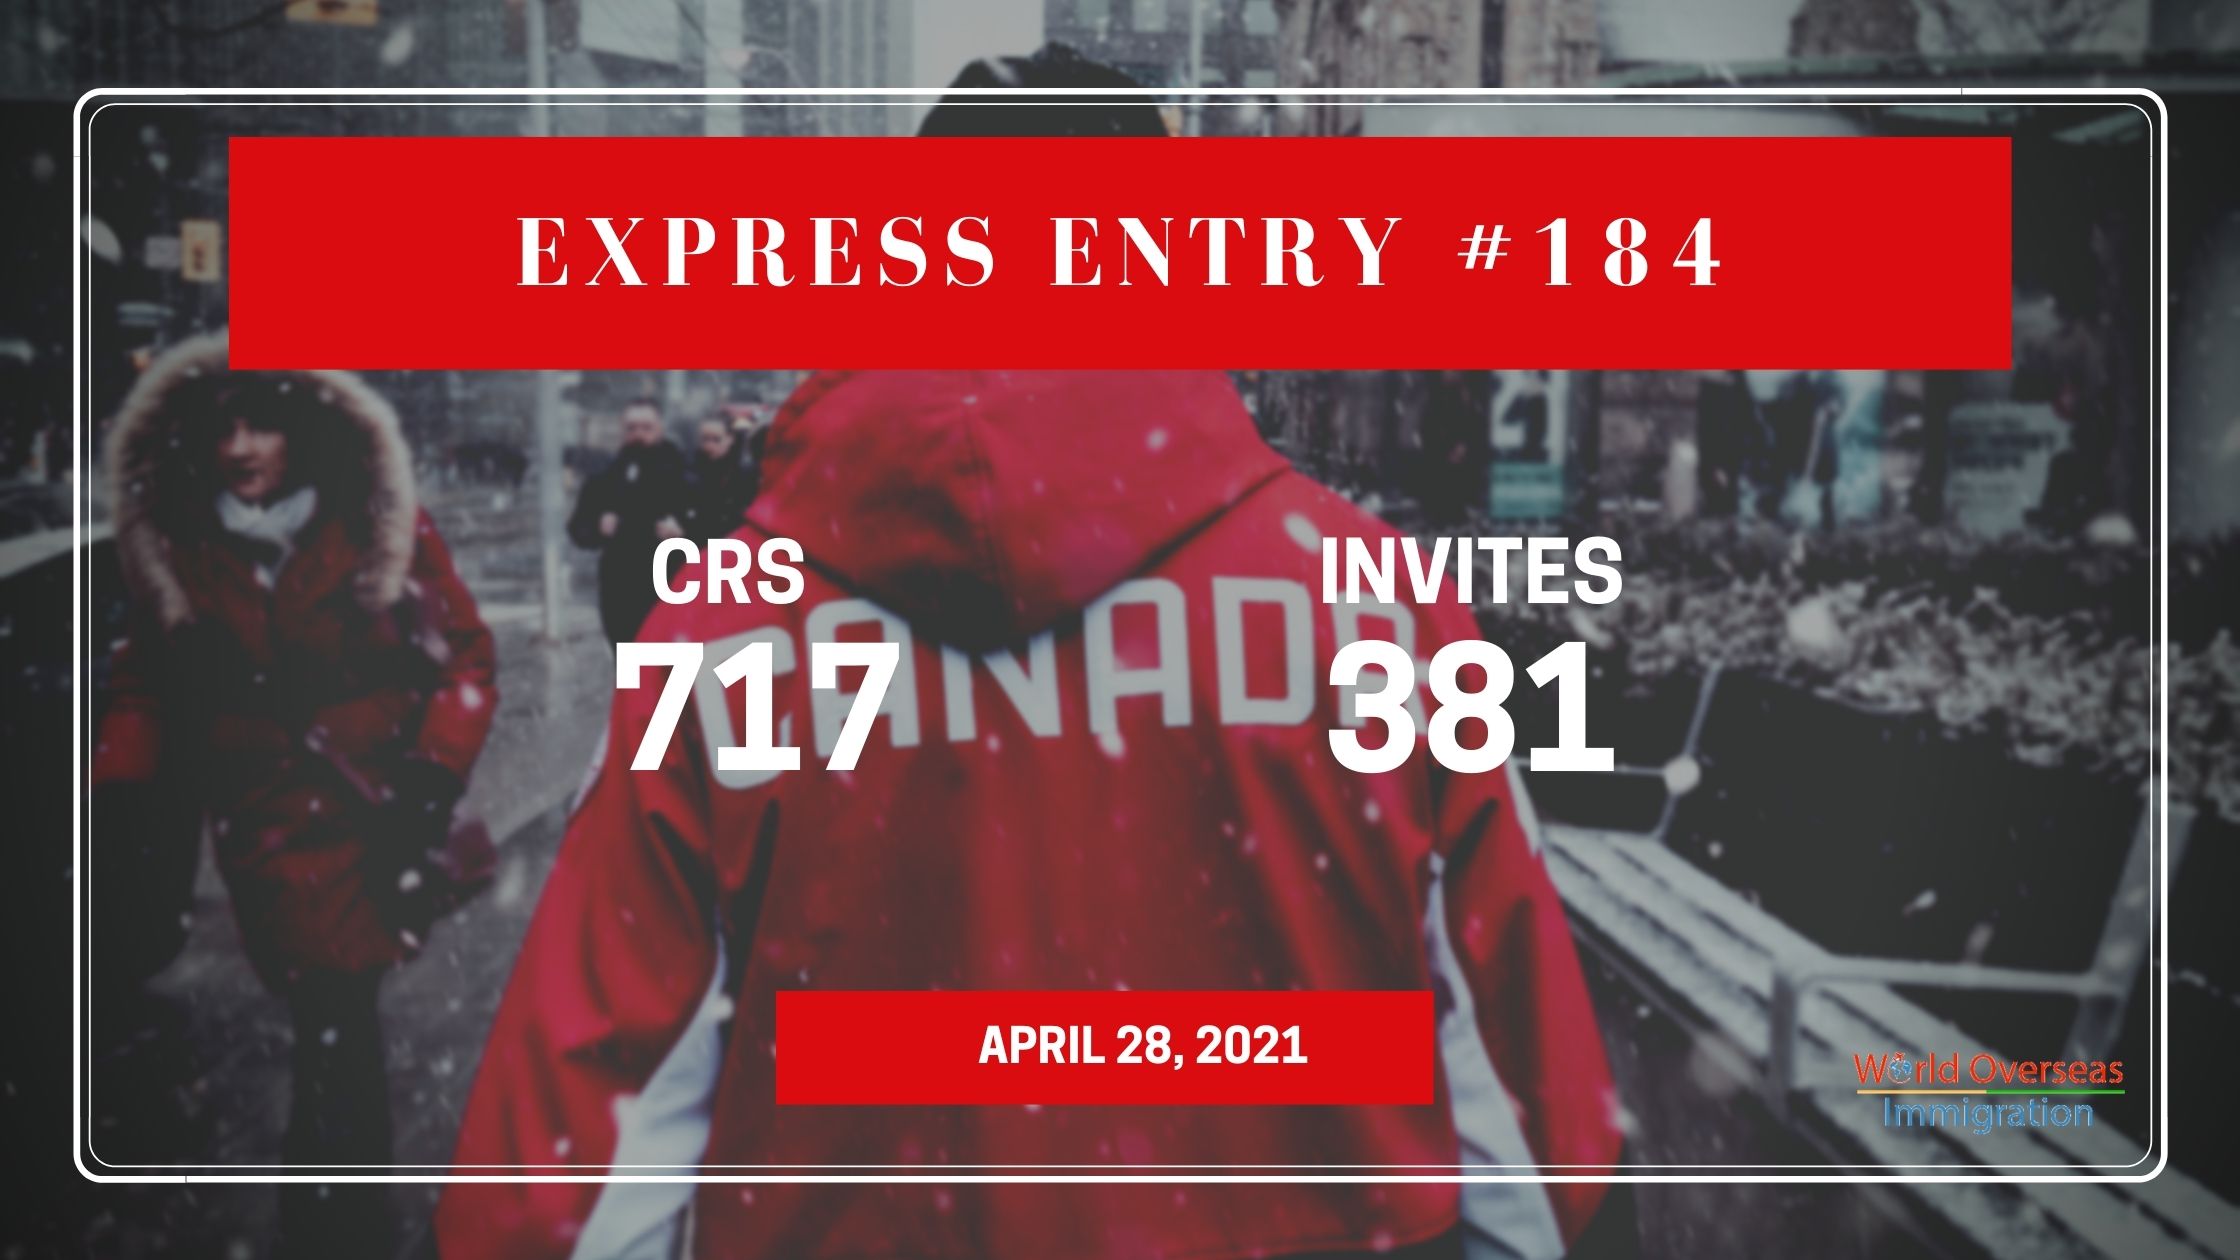 Express Entry #184: 318 PNP candidates are invited